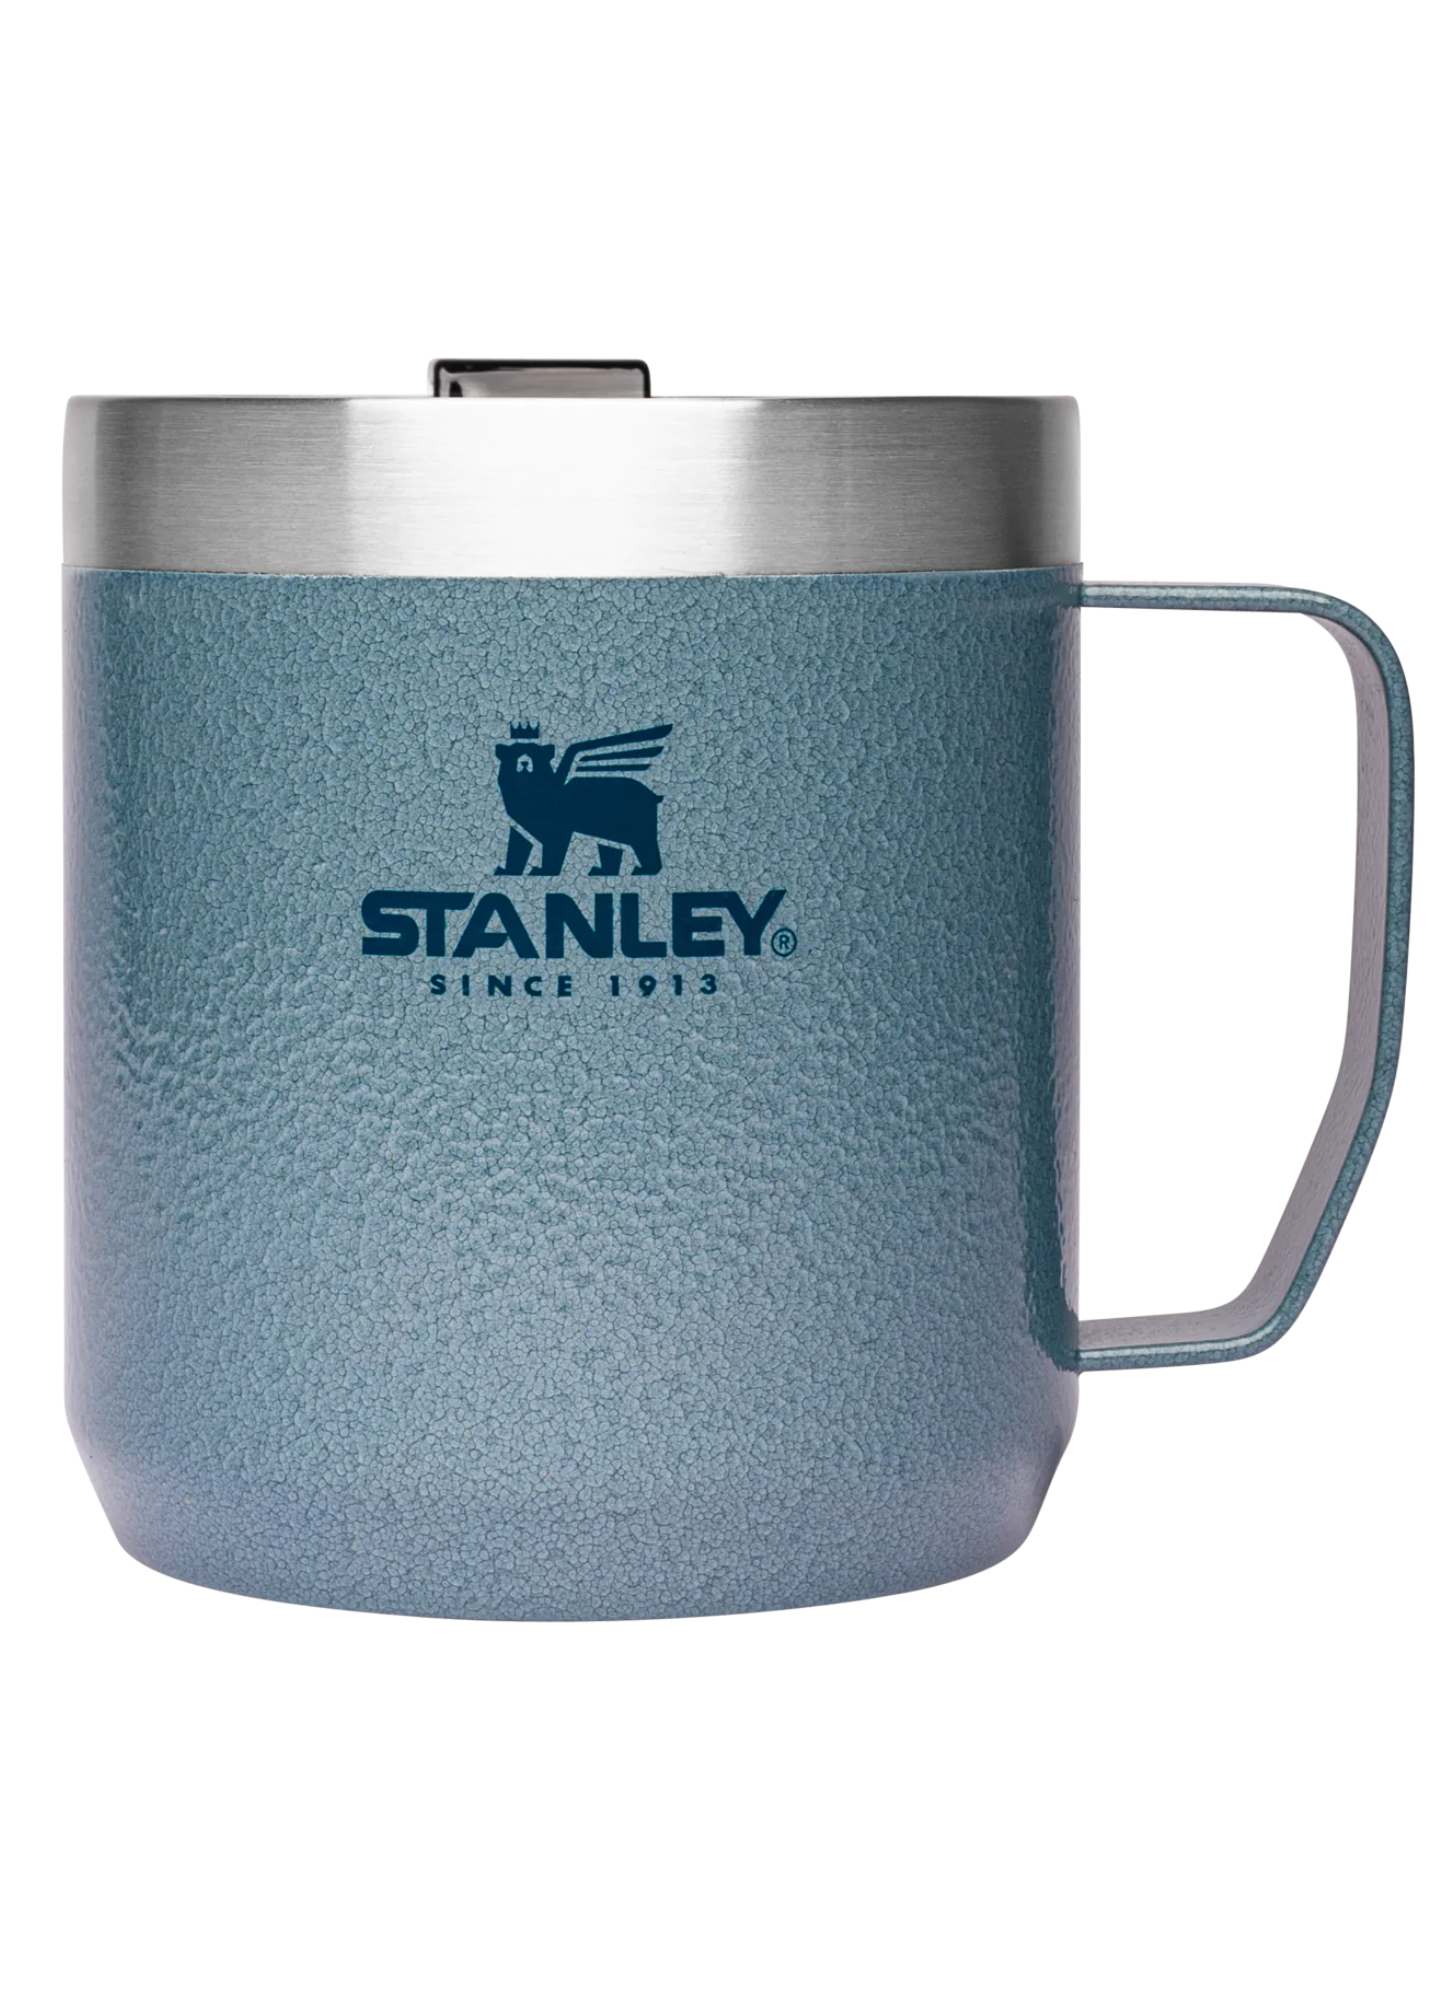 Stanley Classic Legendary 12 oz Camp Mug  Urban Outfitters Mexico -  Clothing, Music, Home & Accessories